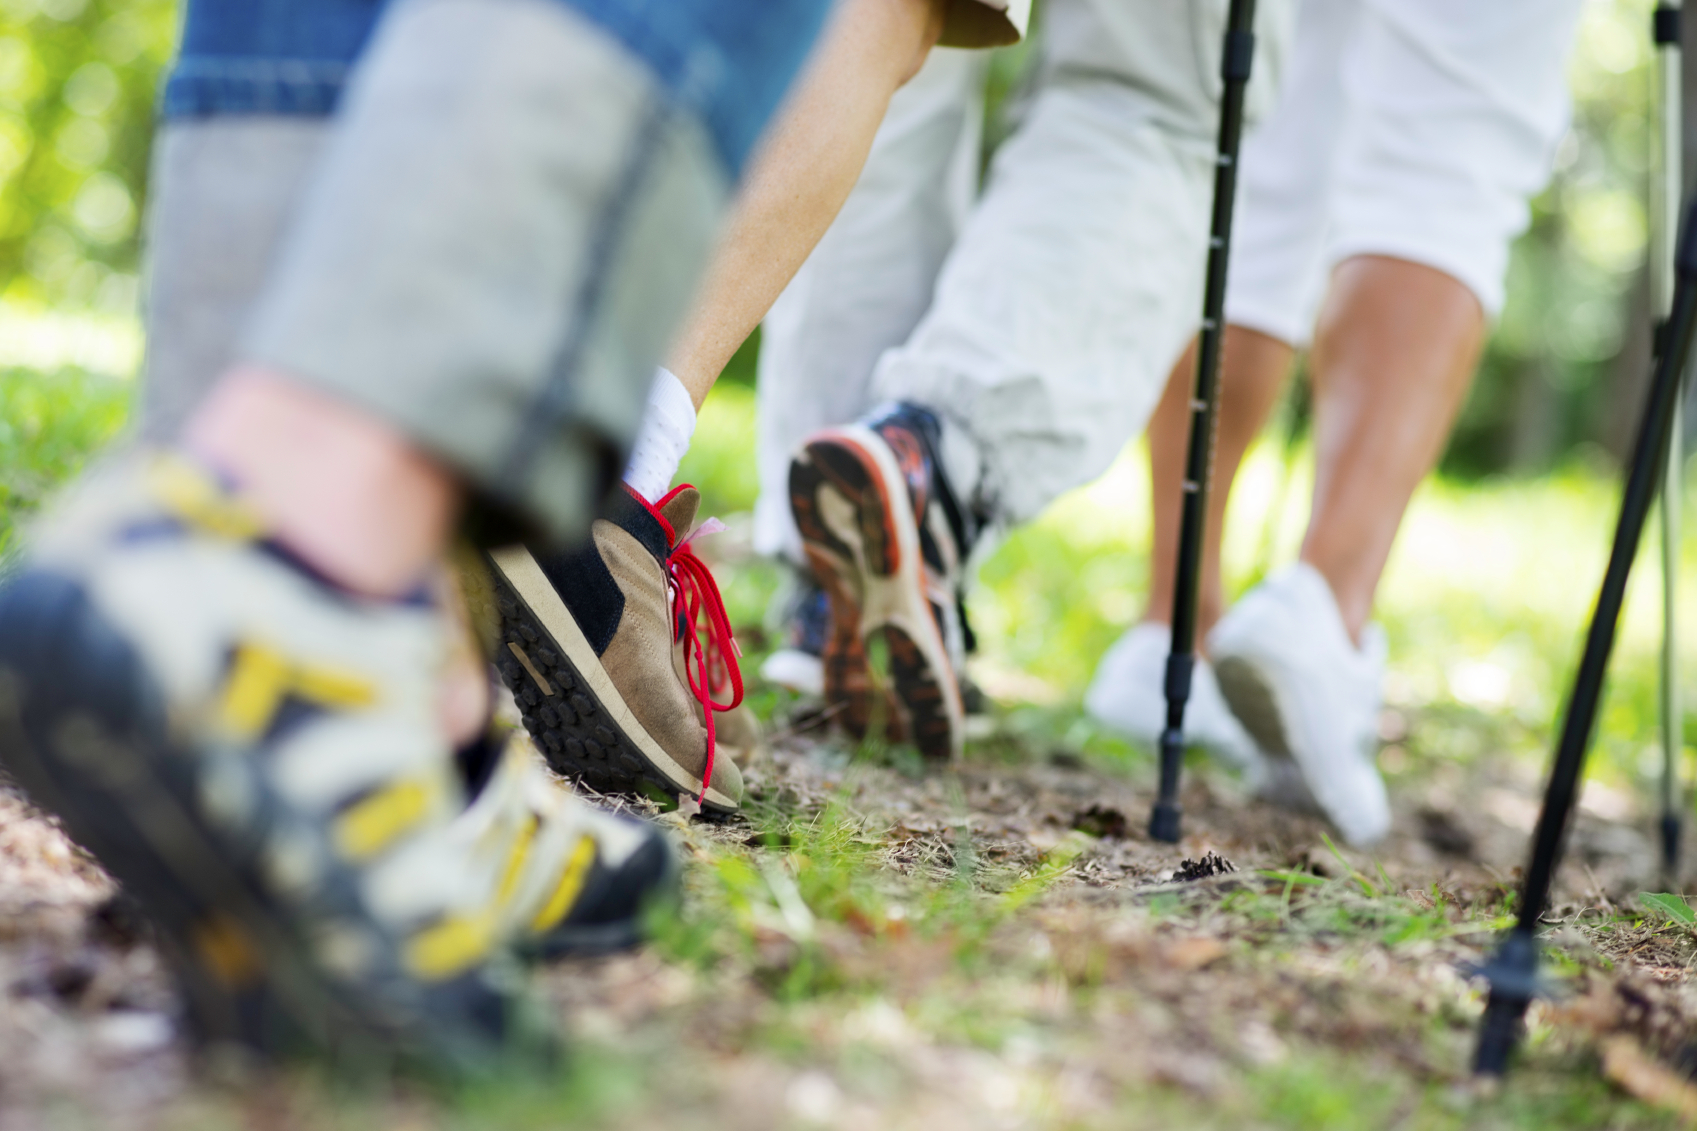 Join a walking group to improve your health!